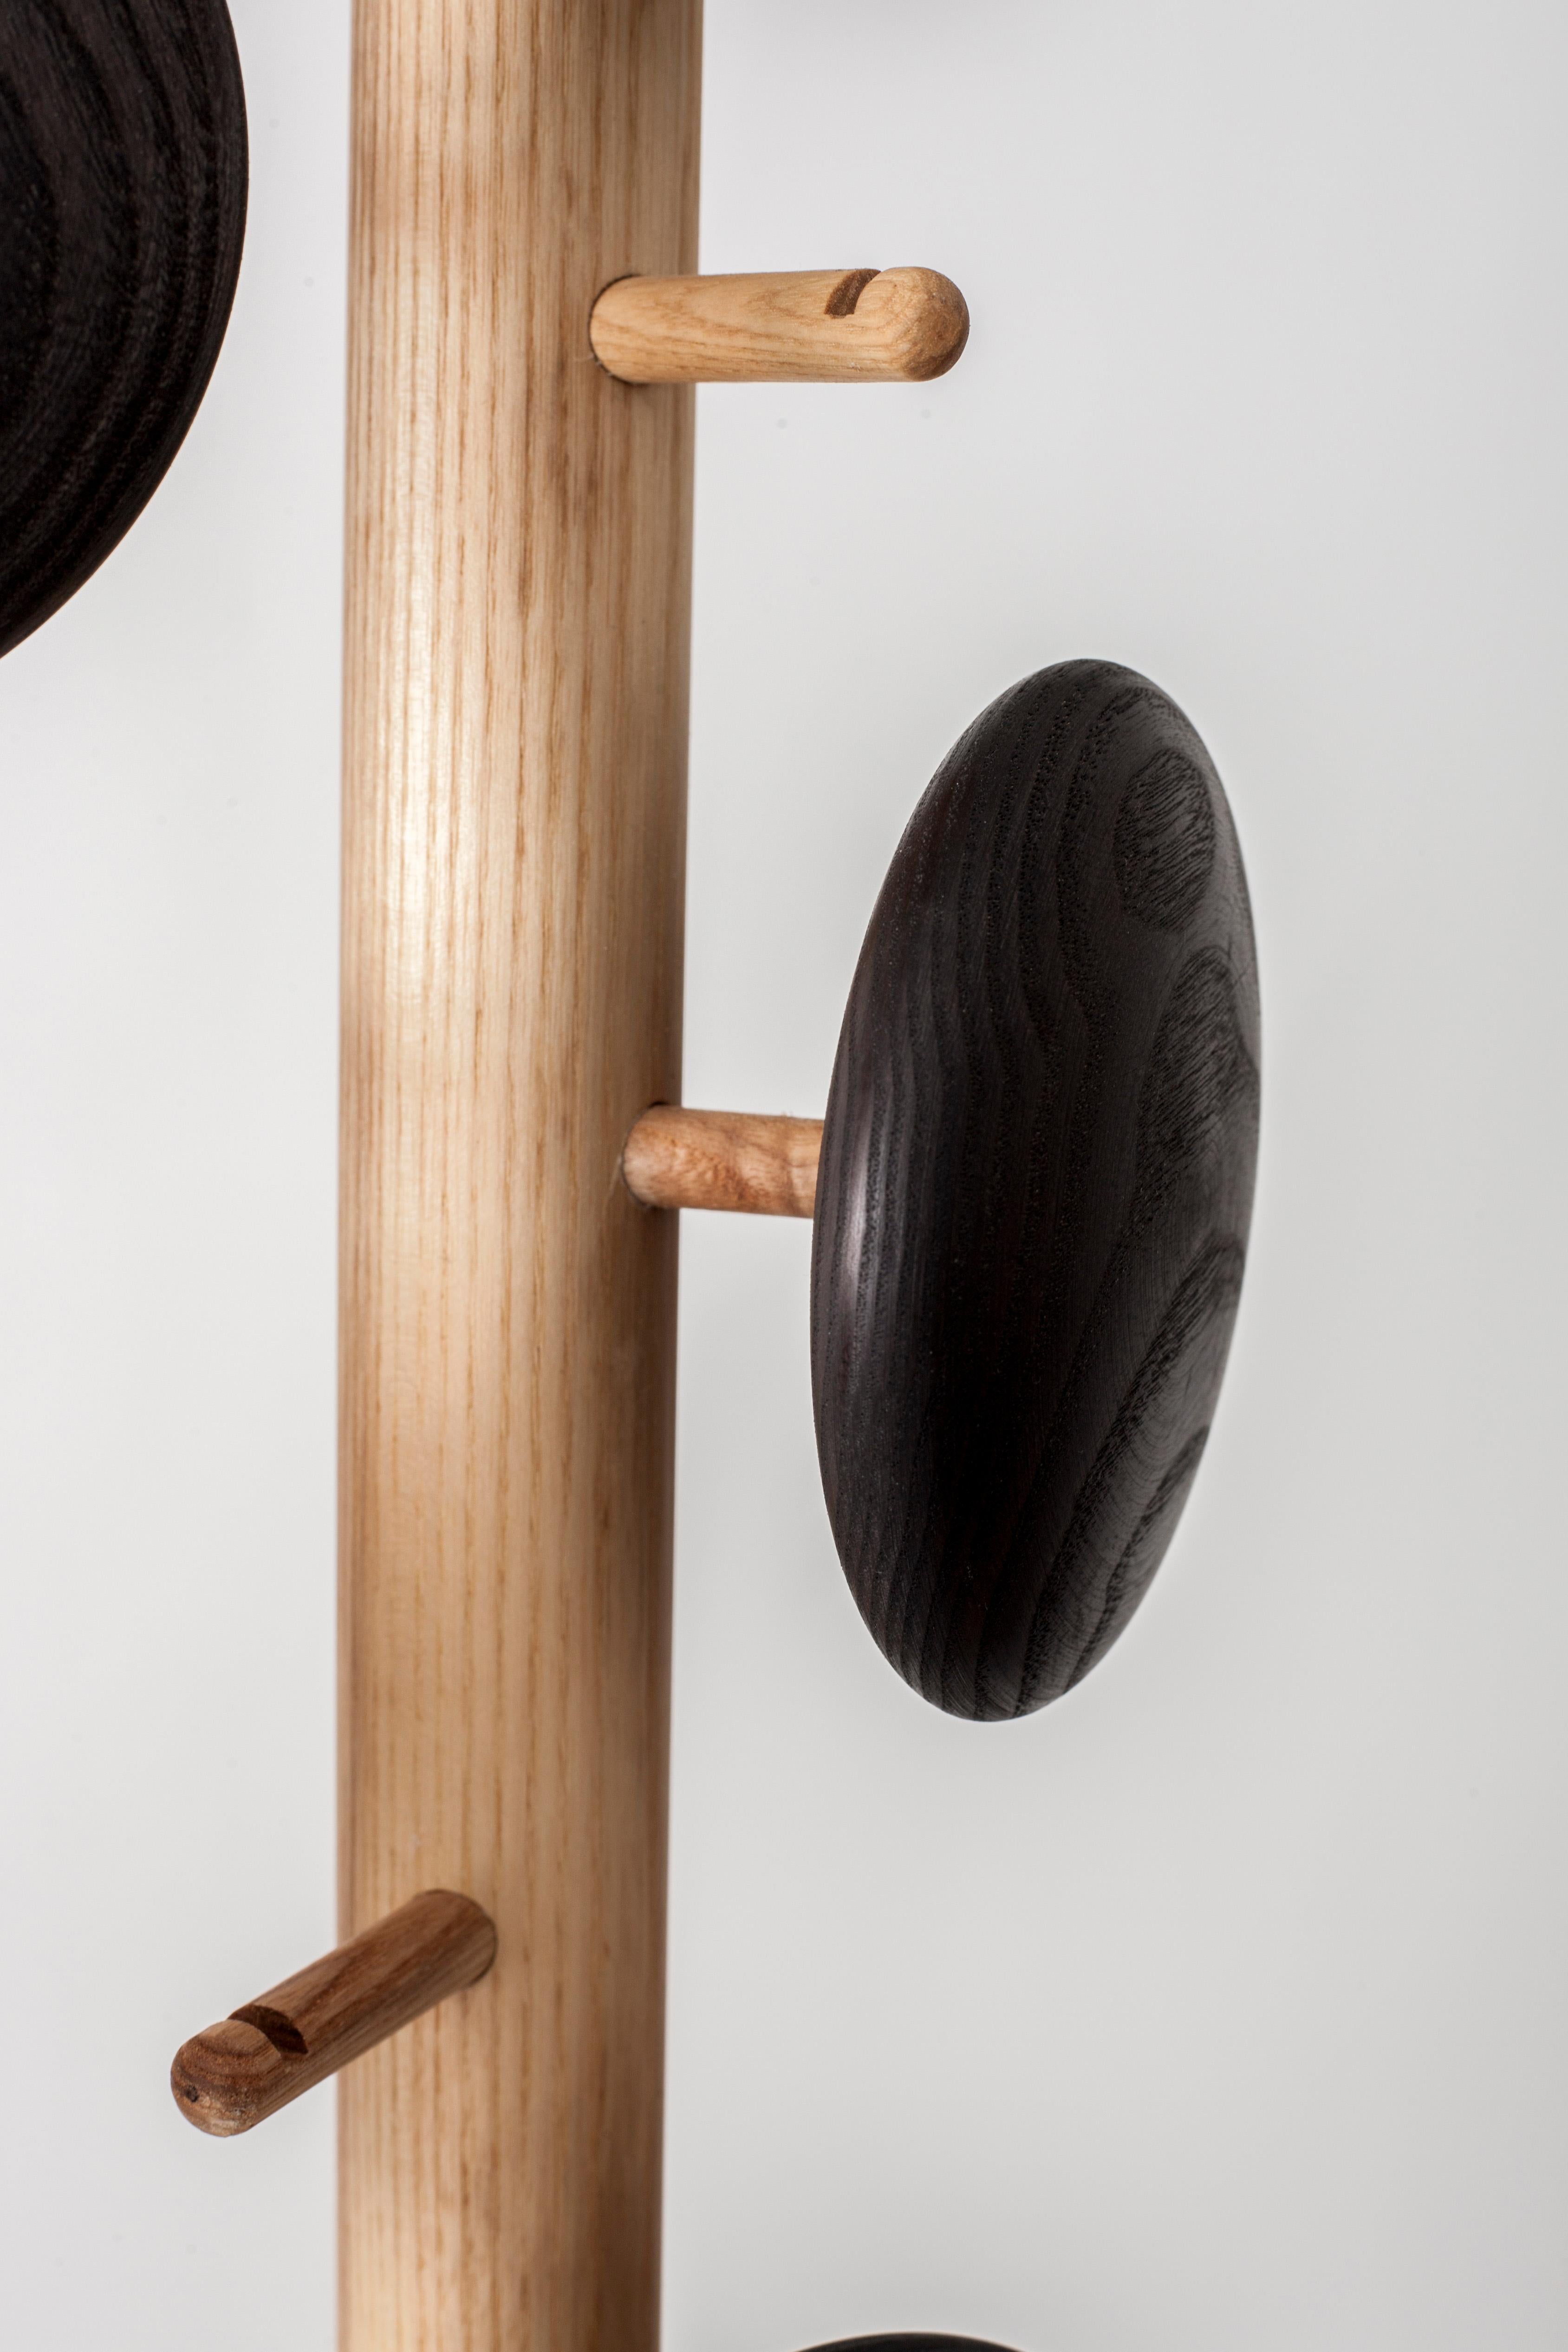 Turned Johnny Stecchino Coat rack Black by Adentro For Sale